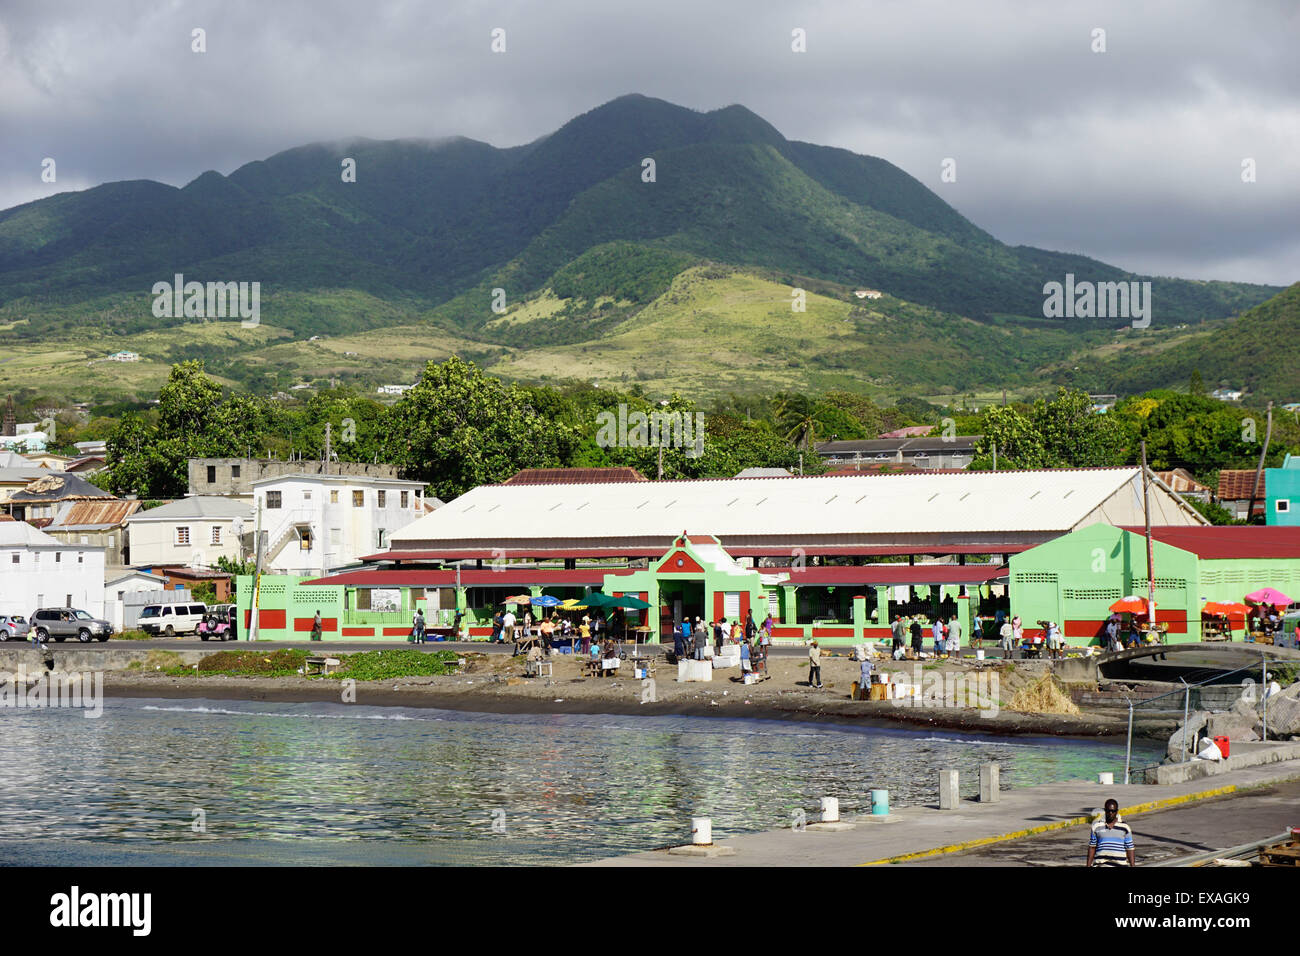 Basseterre, St. Kitts, St. Kitts and Nevis, Leeward Islands, West Indies, Caribbean, Central America Stock Photo